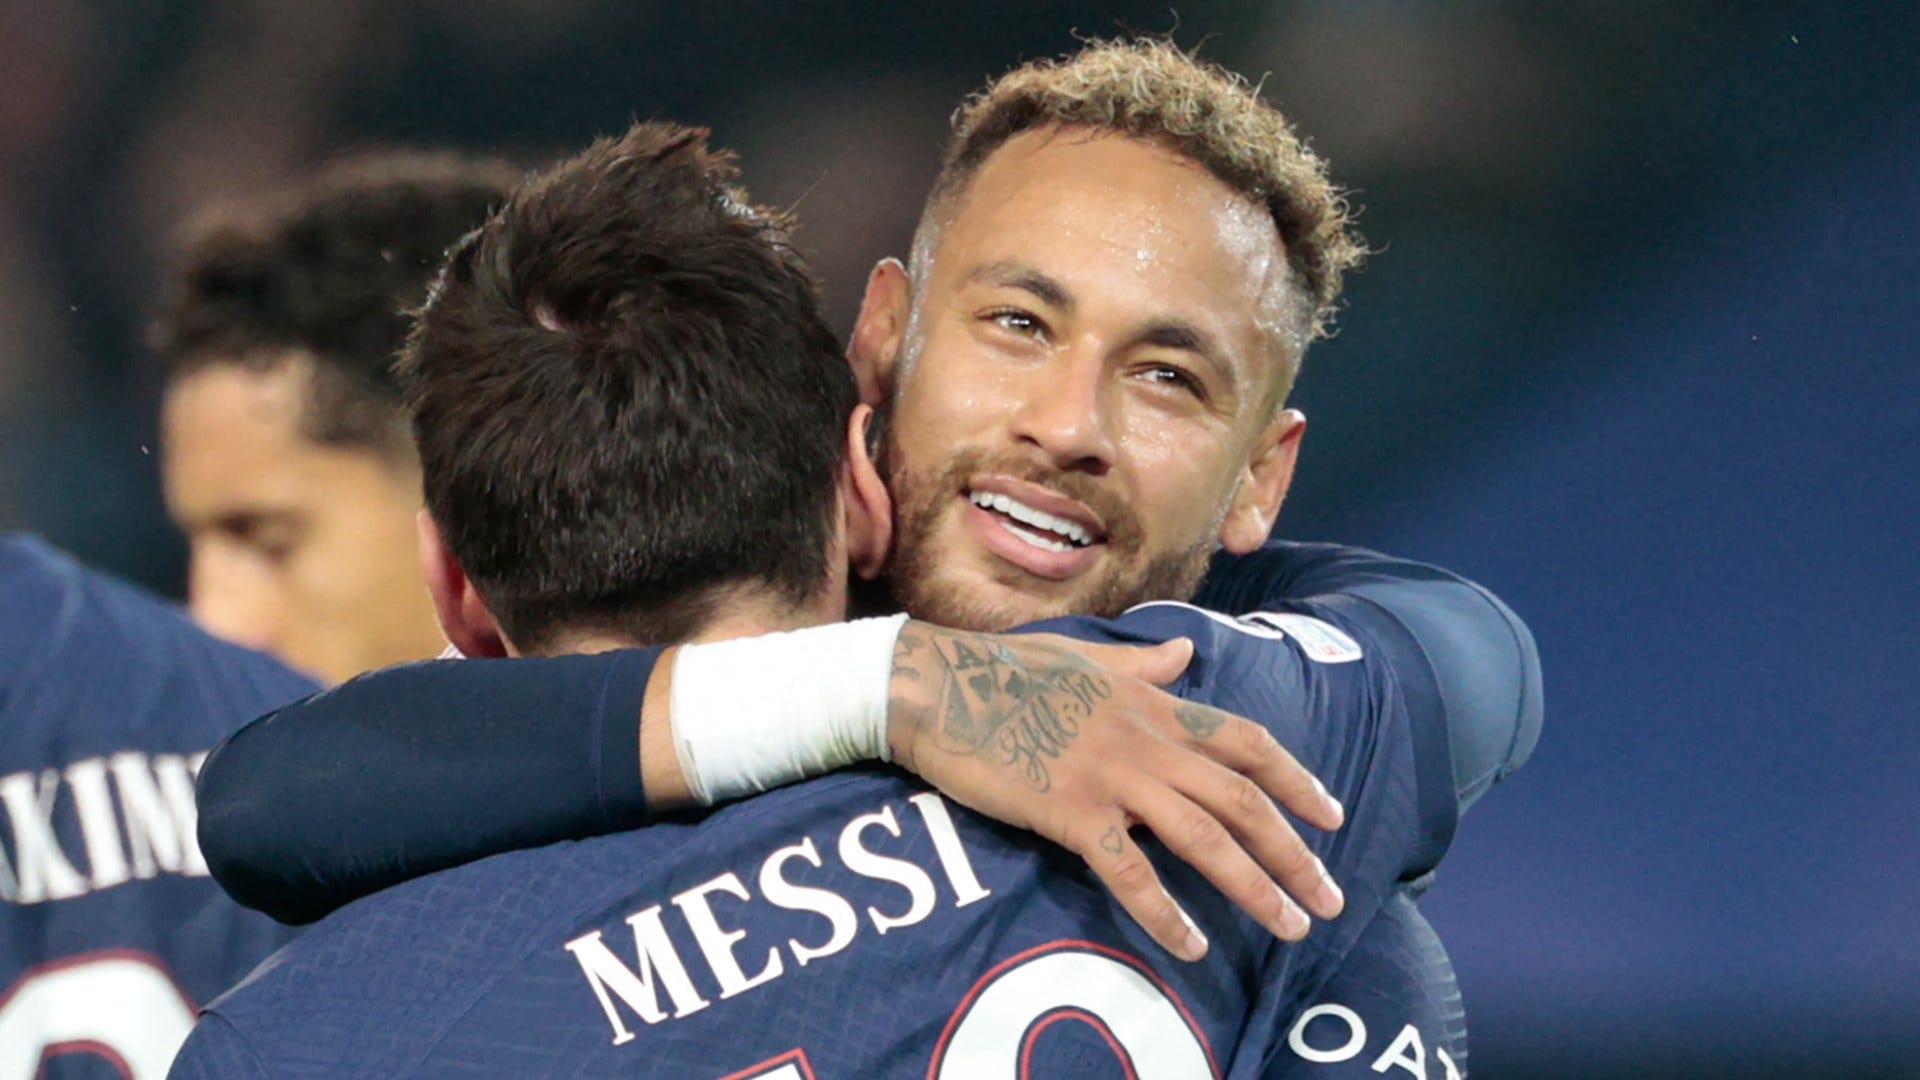 'I love you' - Neymar reacts to 'brother' Lionel Messi leaving PSG